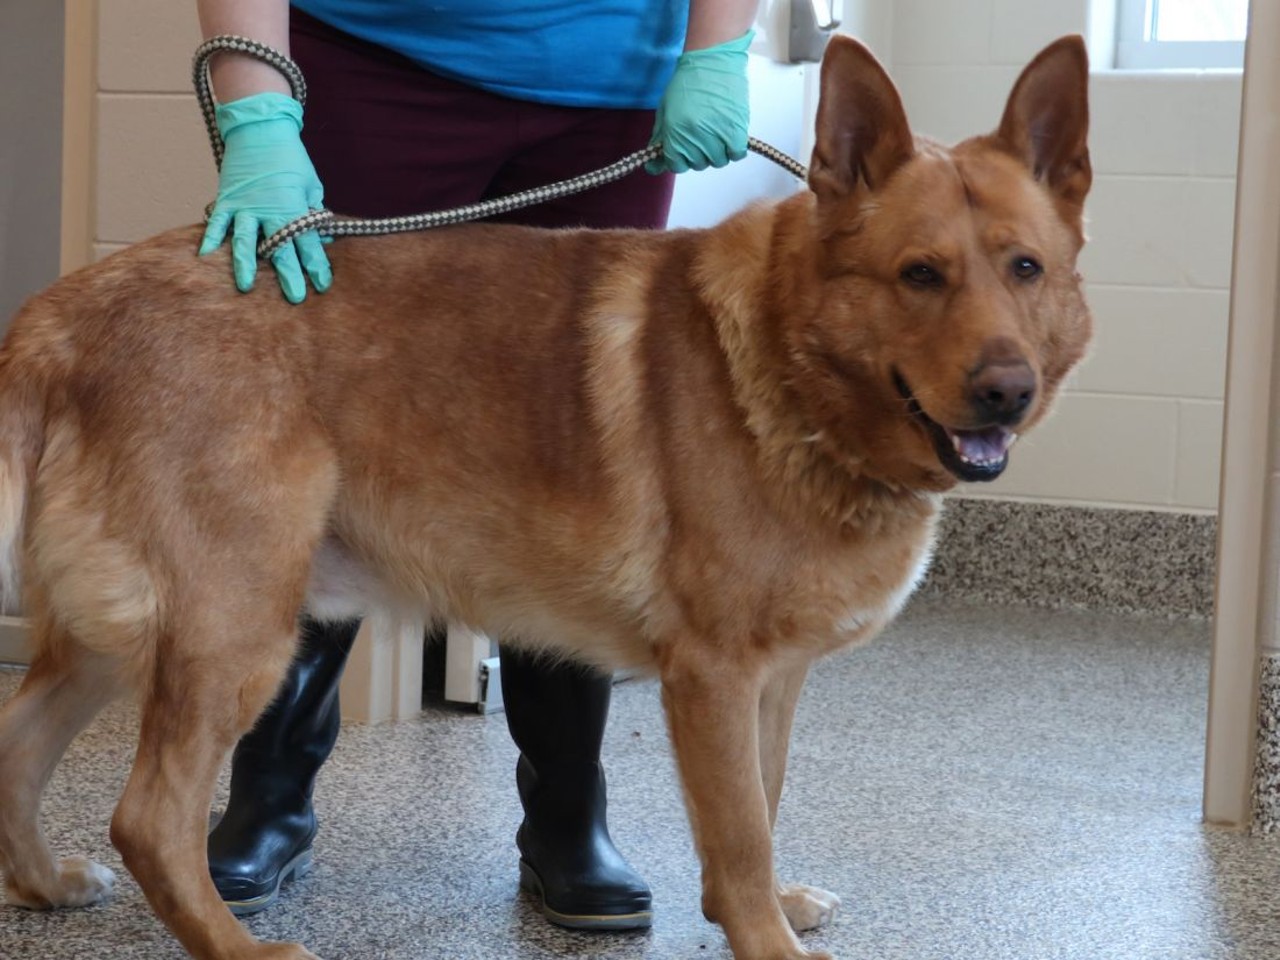 NAME: Papa Wrigs
GENDER: Male
BREED: German Shepherd-Alaskan Malamute mix
AGE: 5 years, 1 month
WEIGHT: 120 pounds
SPECIAL CONSIDERATIONS: None
REASON I CAME TO MHS: Rescued in Highland Park
LOCATION: Mackey Center for Animal Care in Detroit
ID NUMBER: 861021